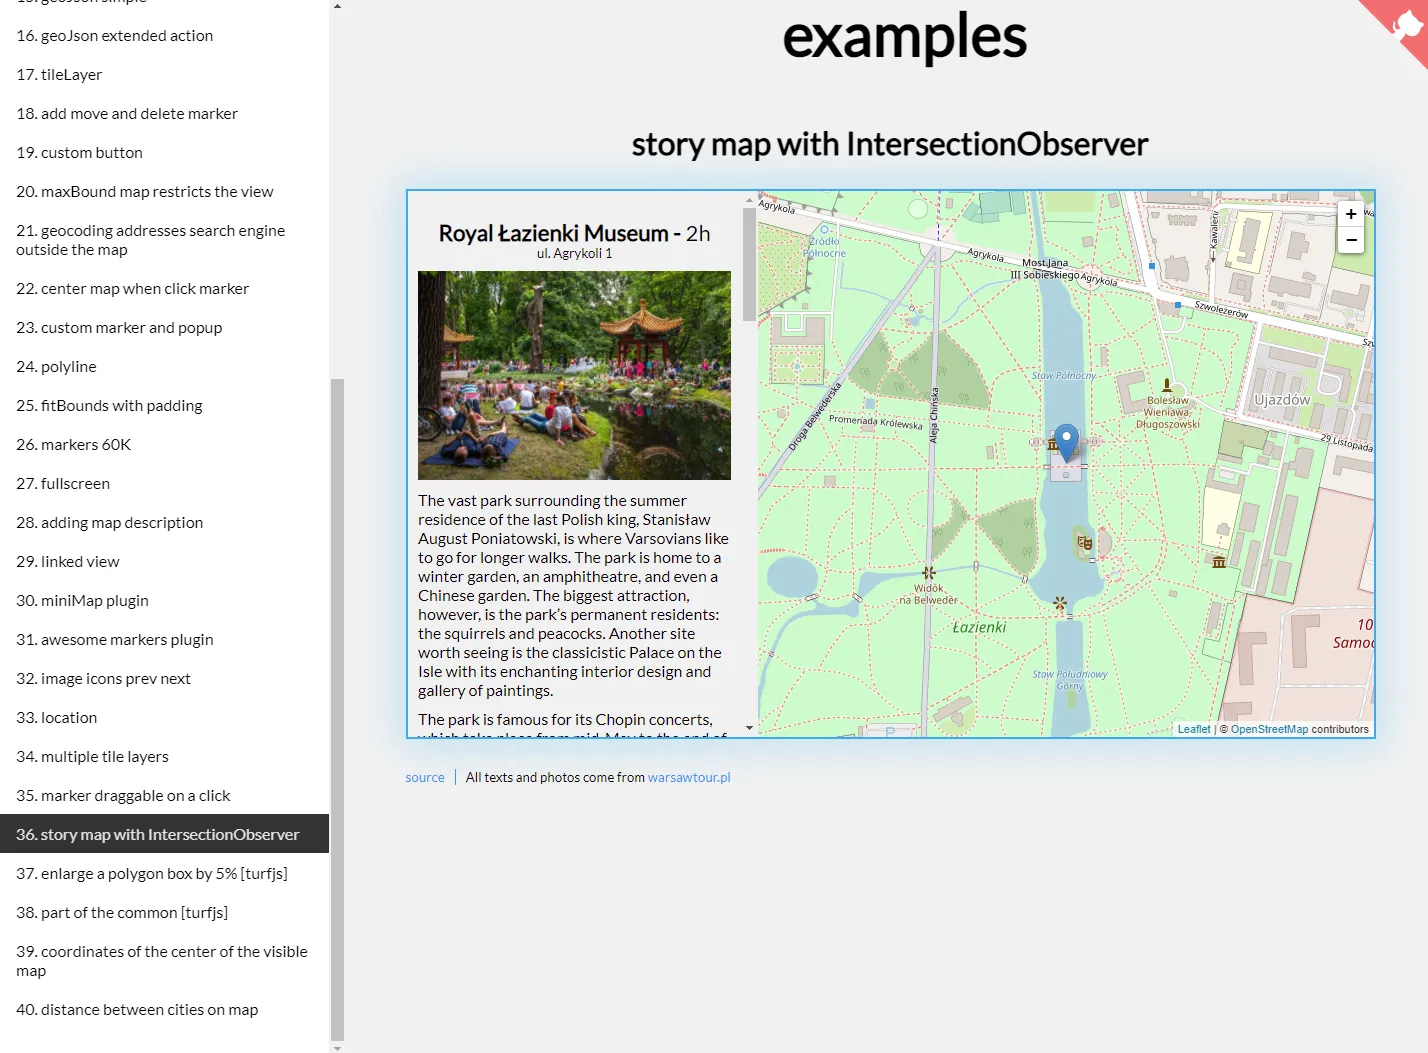 A collection of examples of leaflet map usage